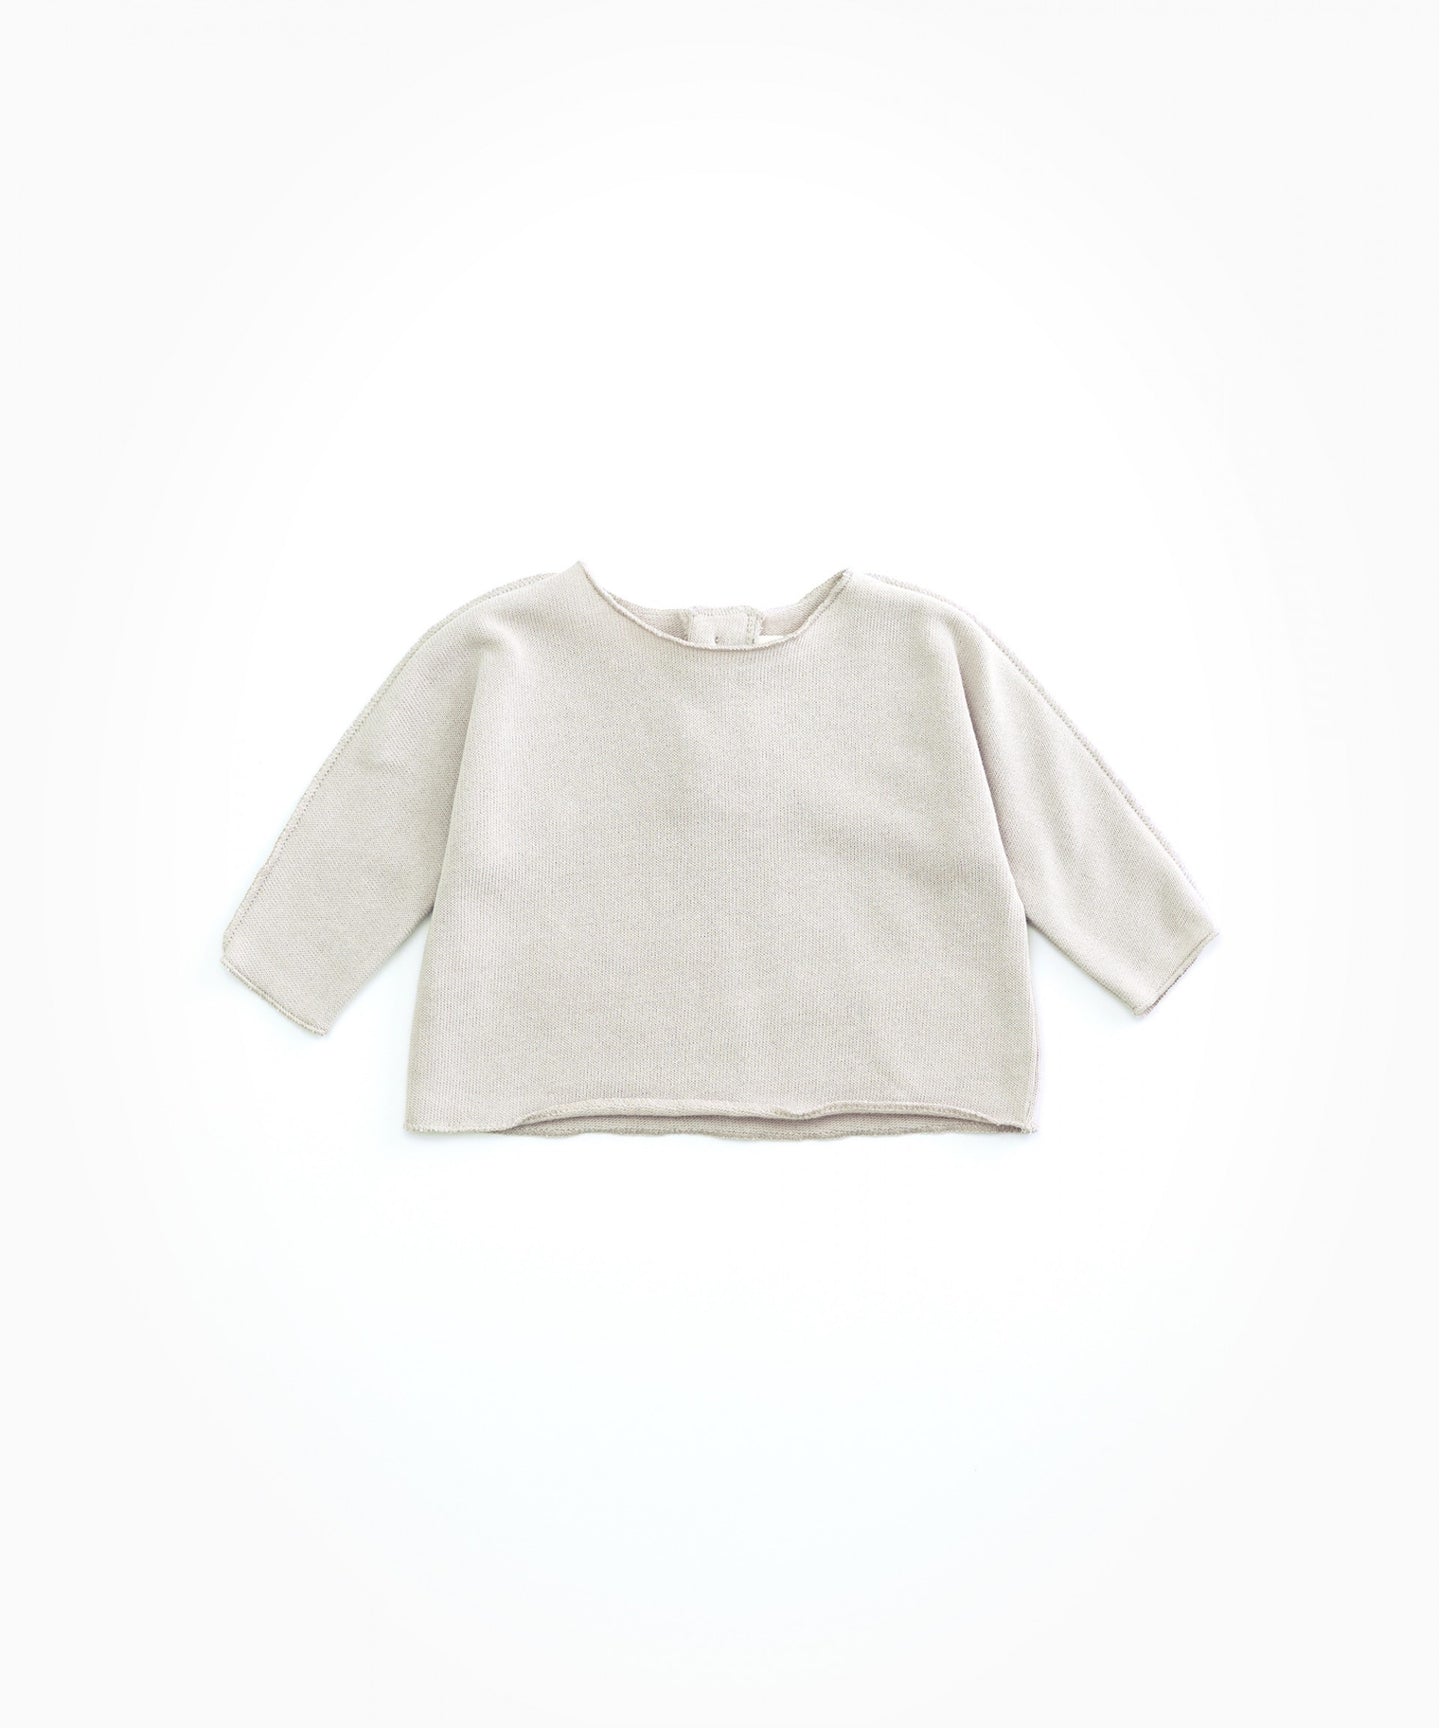 Play Up - Organic Cotton Top W/ Wood Buttons - Ricardo